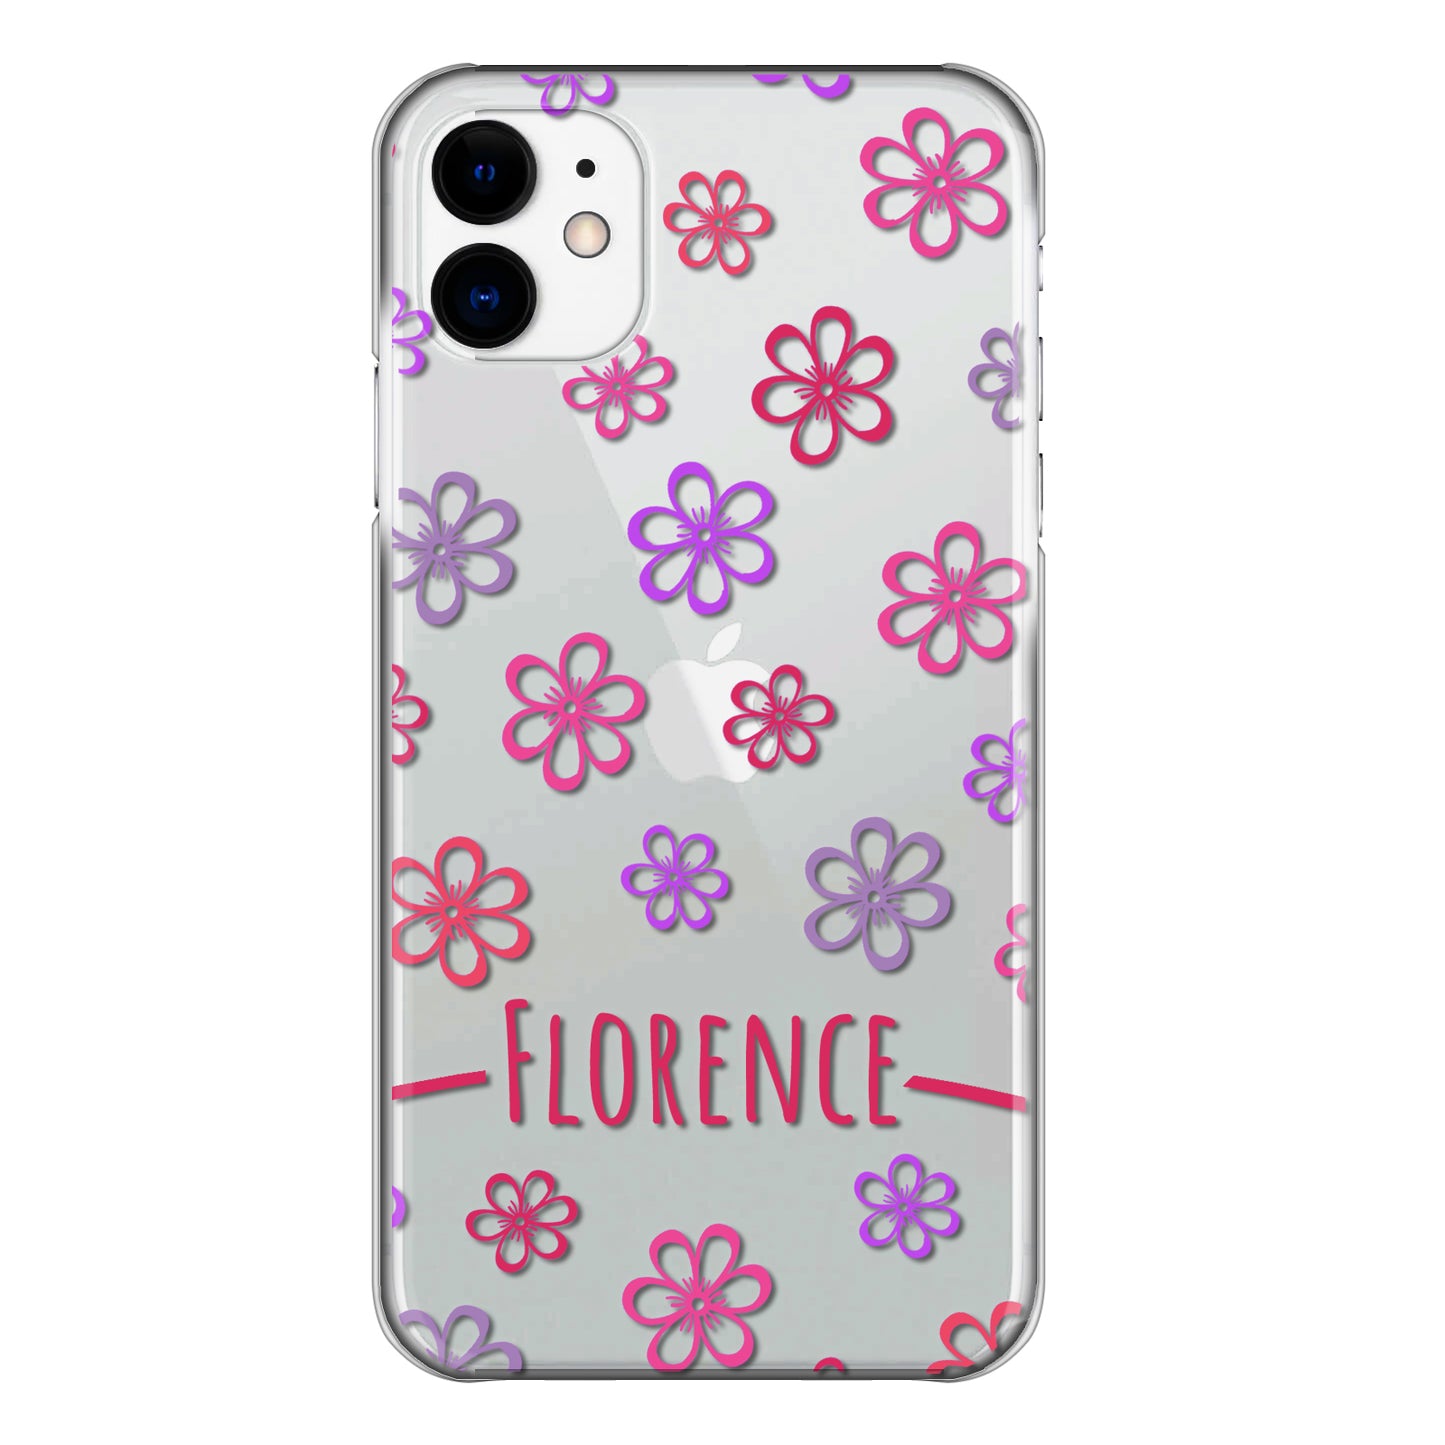 Personalised Nokia Phone Hard Case with Colourful Flowers and Cute Pink Text